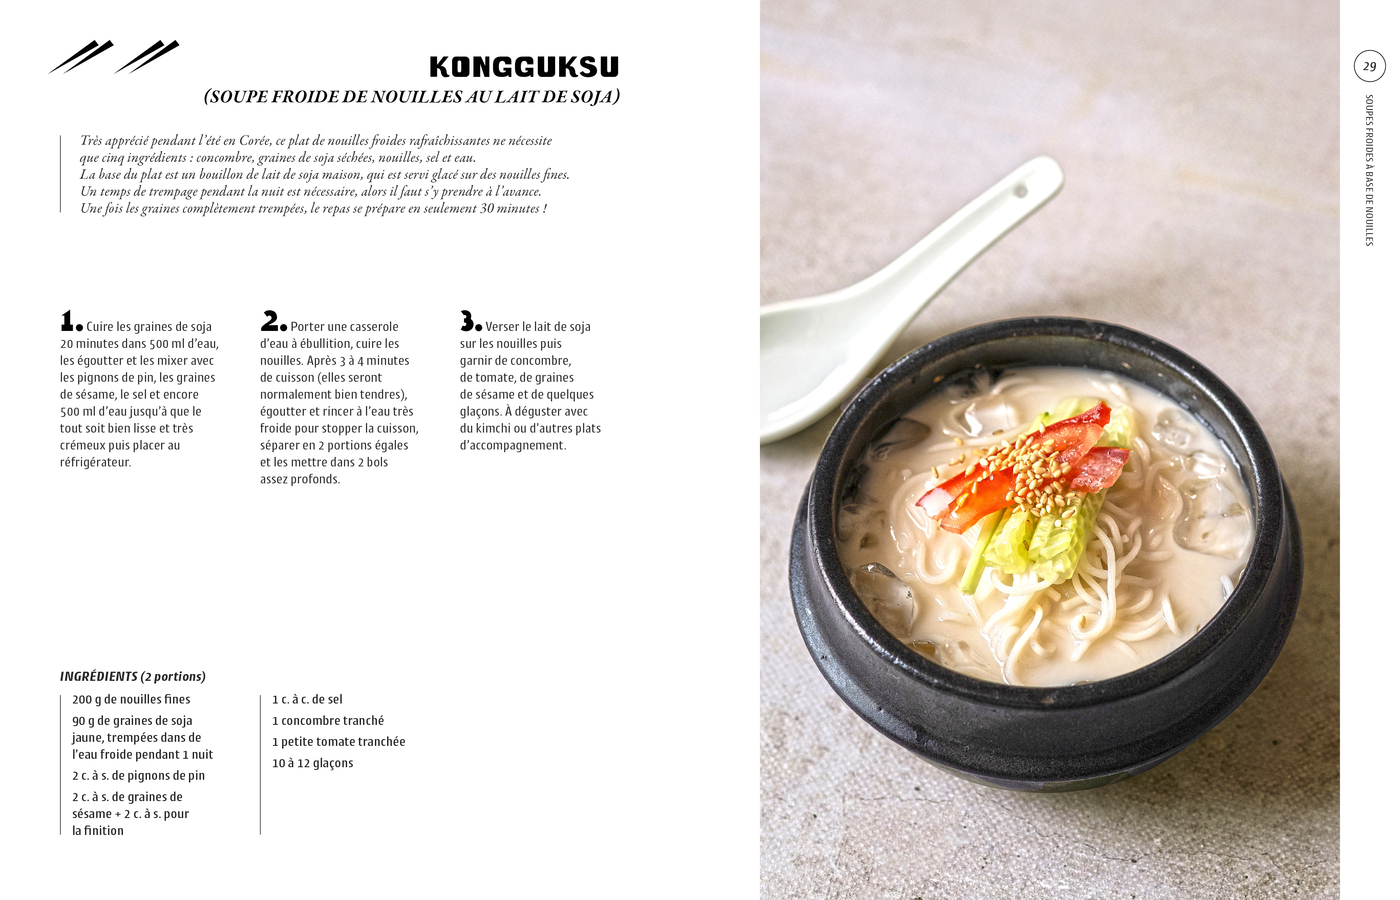 ramen and co by Cheynese, La Plage editions: inside page